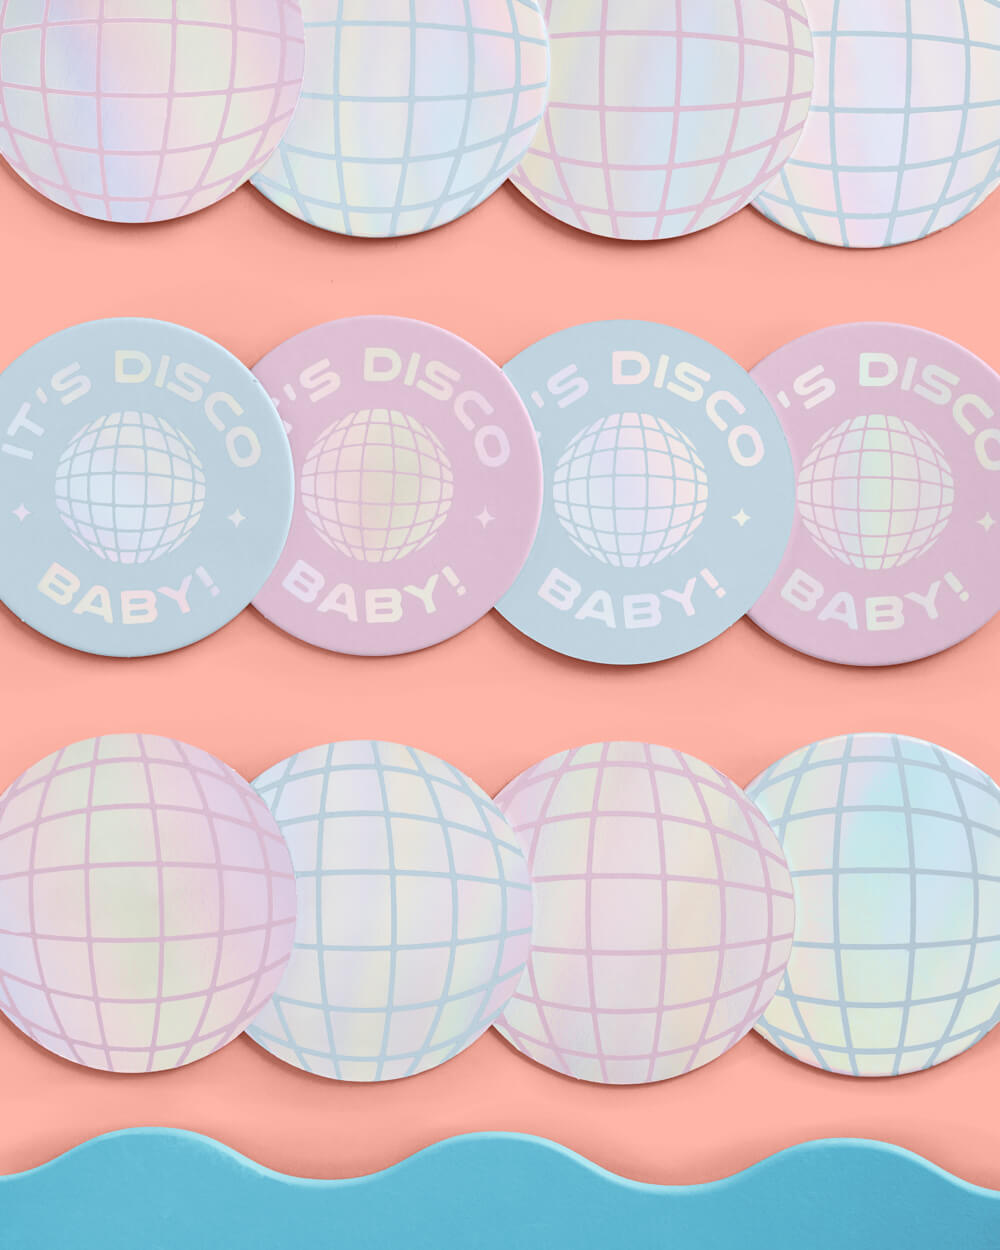 It's Disco, Baby! Coasters - 16 paper coasters